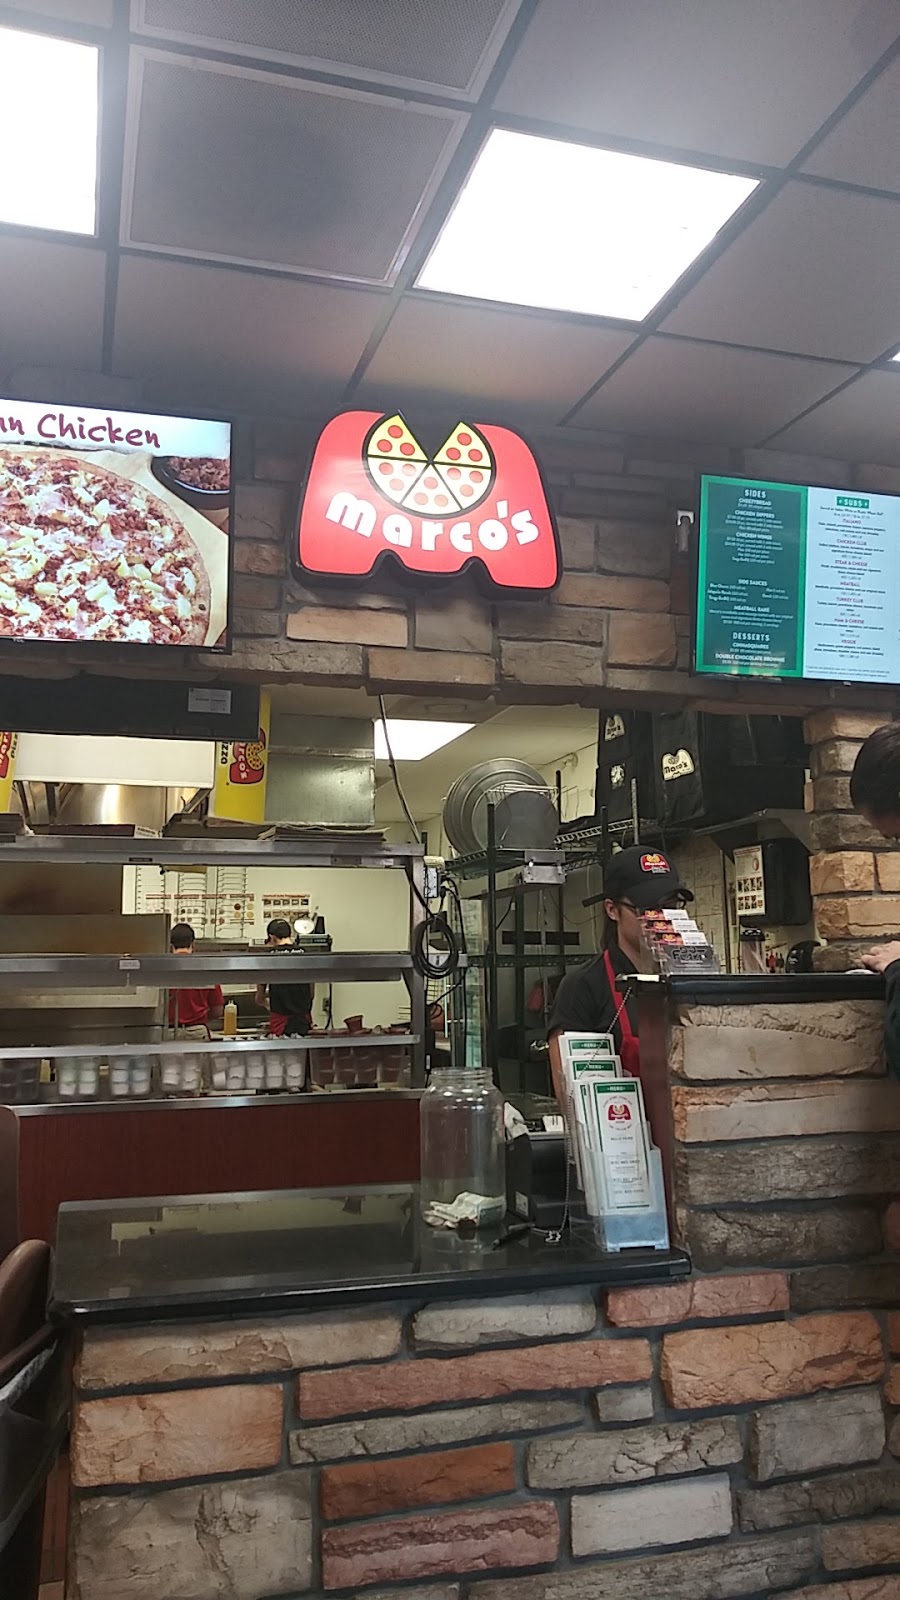 Marcos Pizza | Photo 9 of 10 | Address: 6914 Hanley Rd, Tampa, FL 33634, USA | Phone: (813) 887-4500